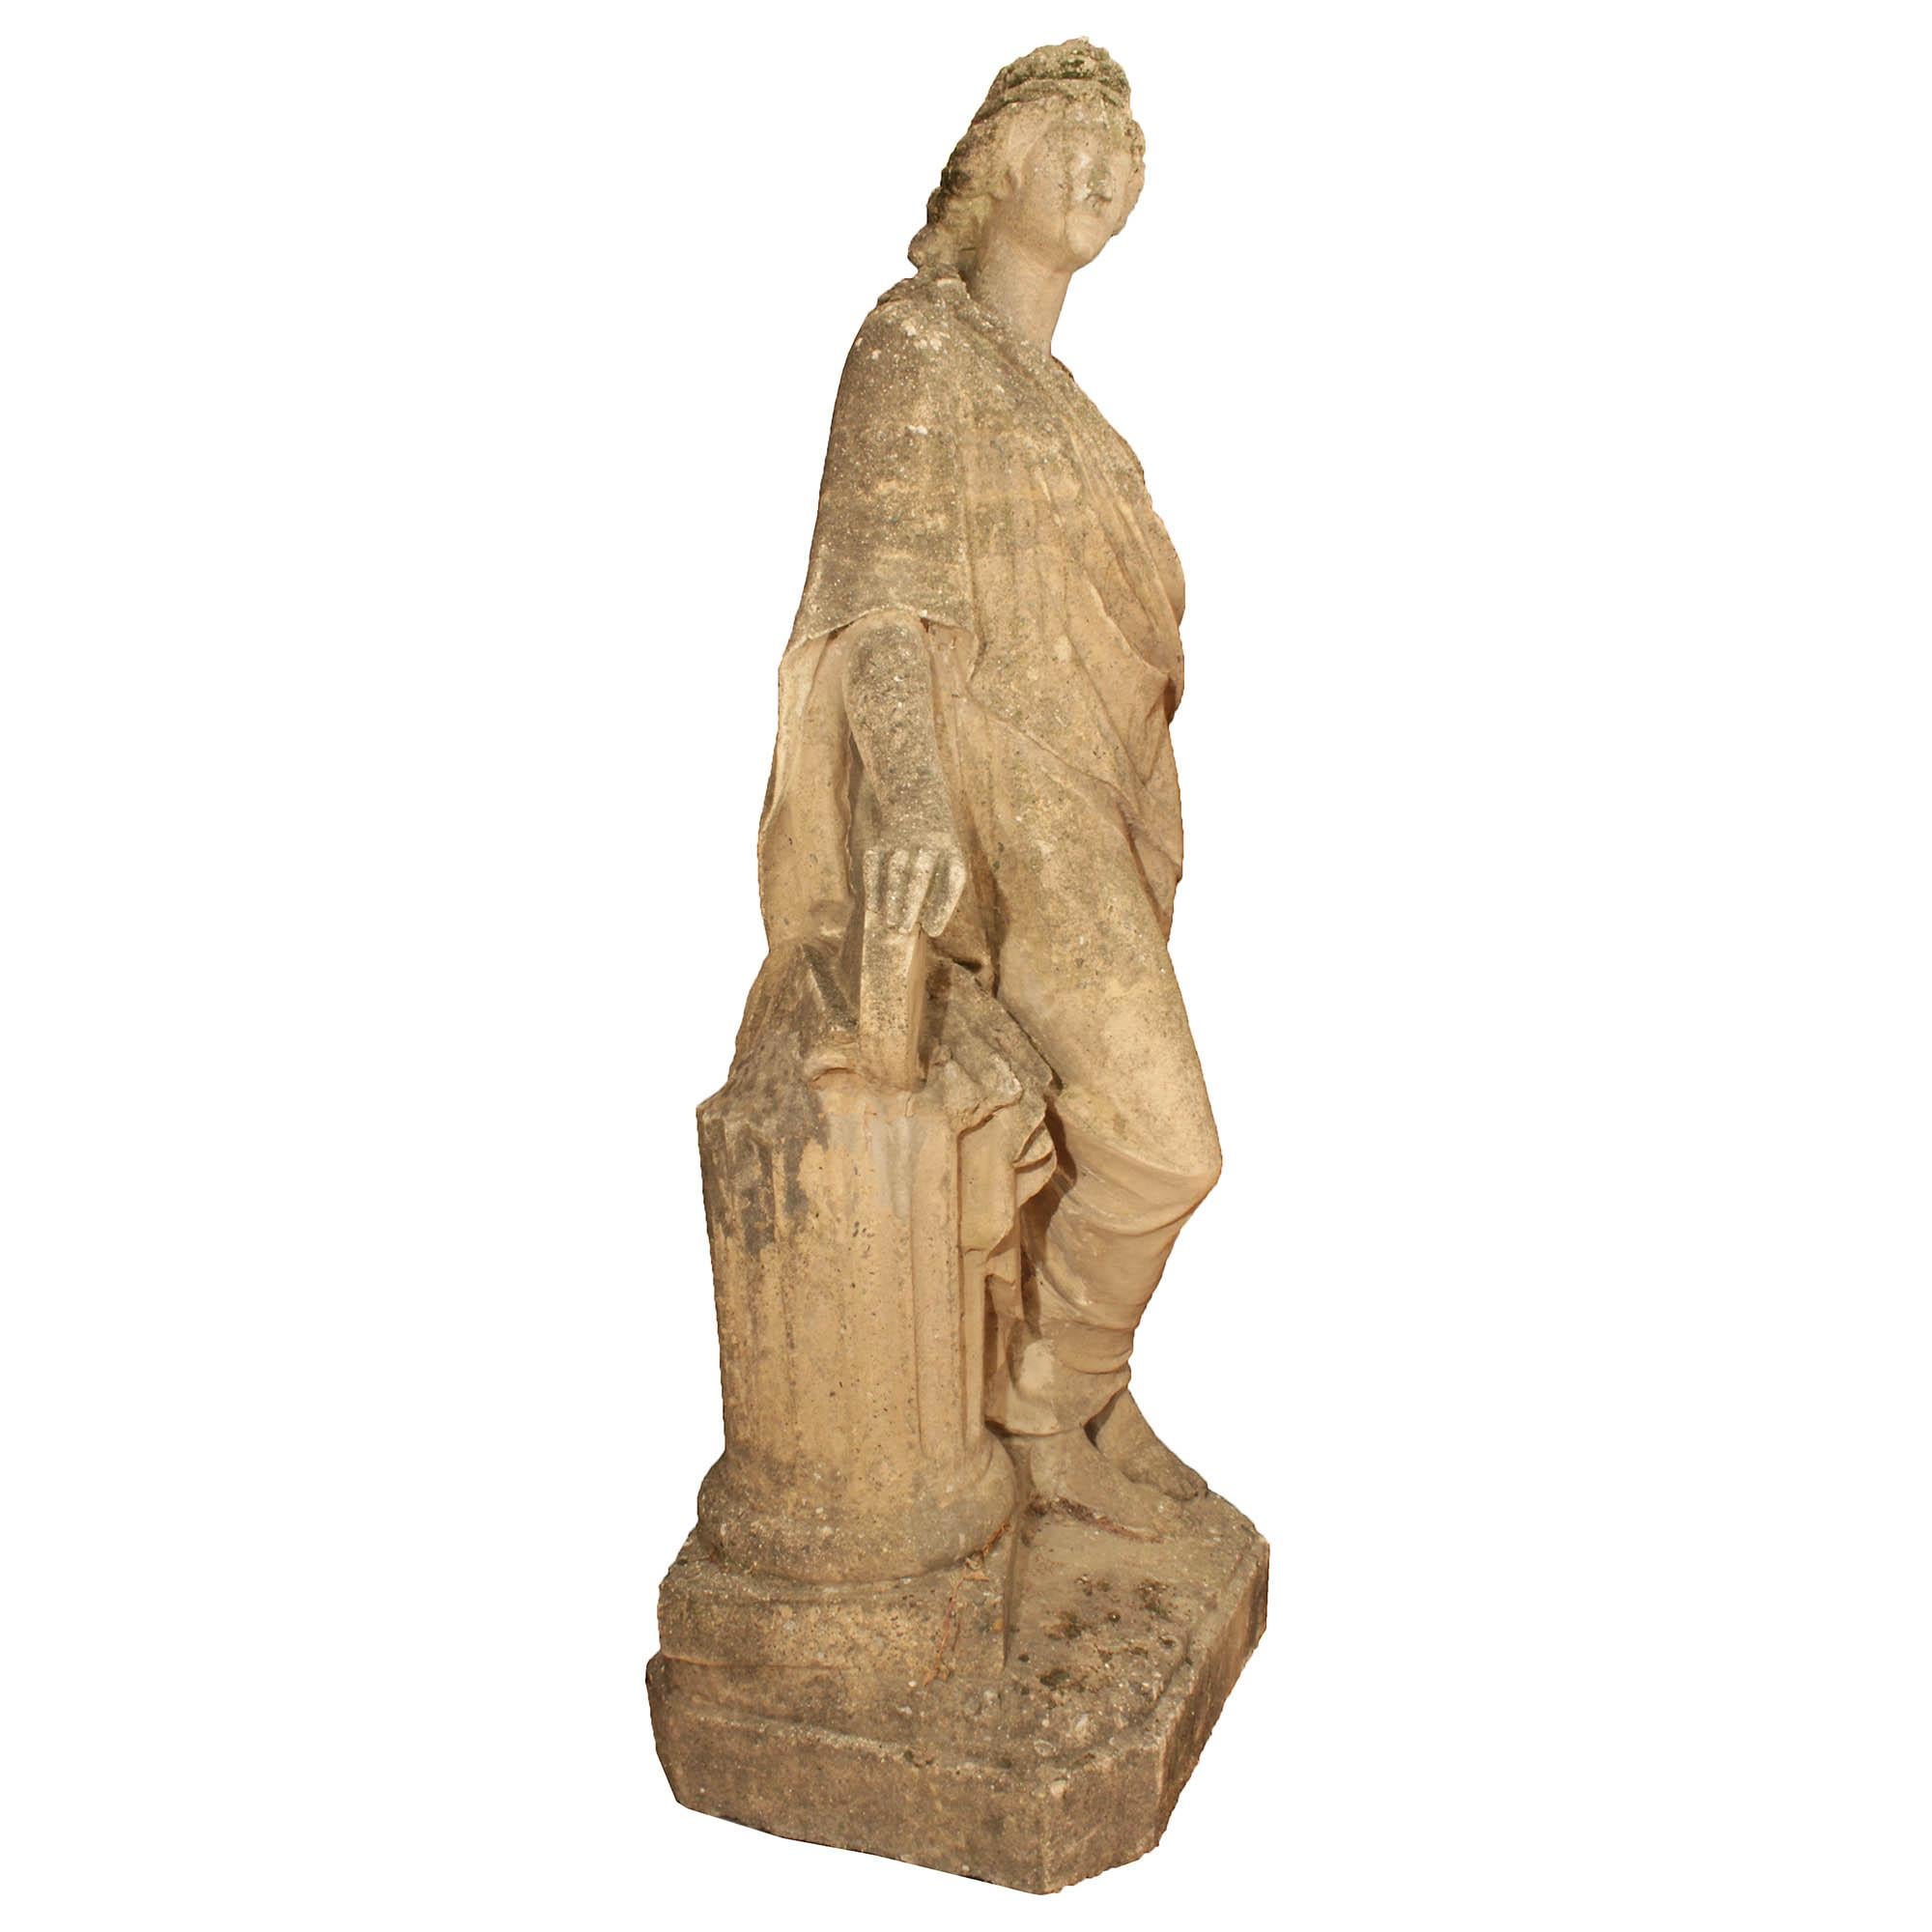 A lovely Italian 19th century stone statue. The Classic female figure is raised on a square stone base with cut corners. She is leaning on a fluted column with her legs crossed. The figural is adorned in classical dress with her hair up, dressed